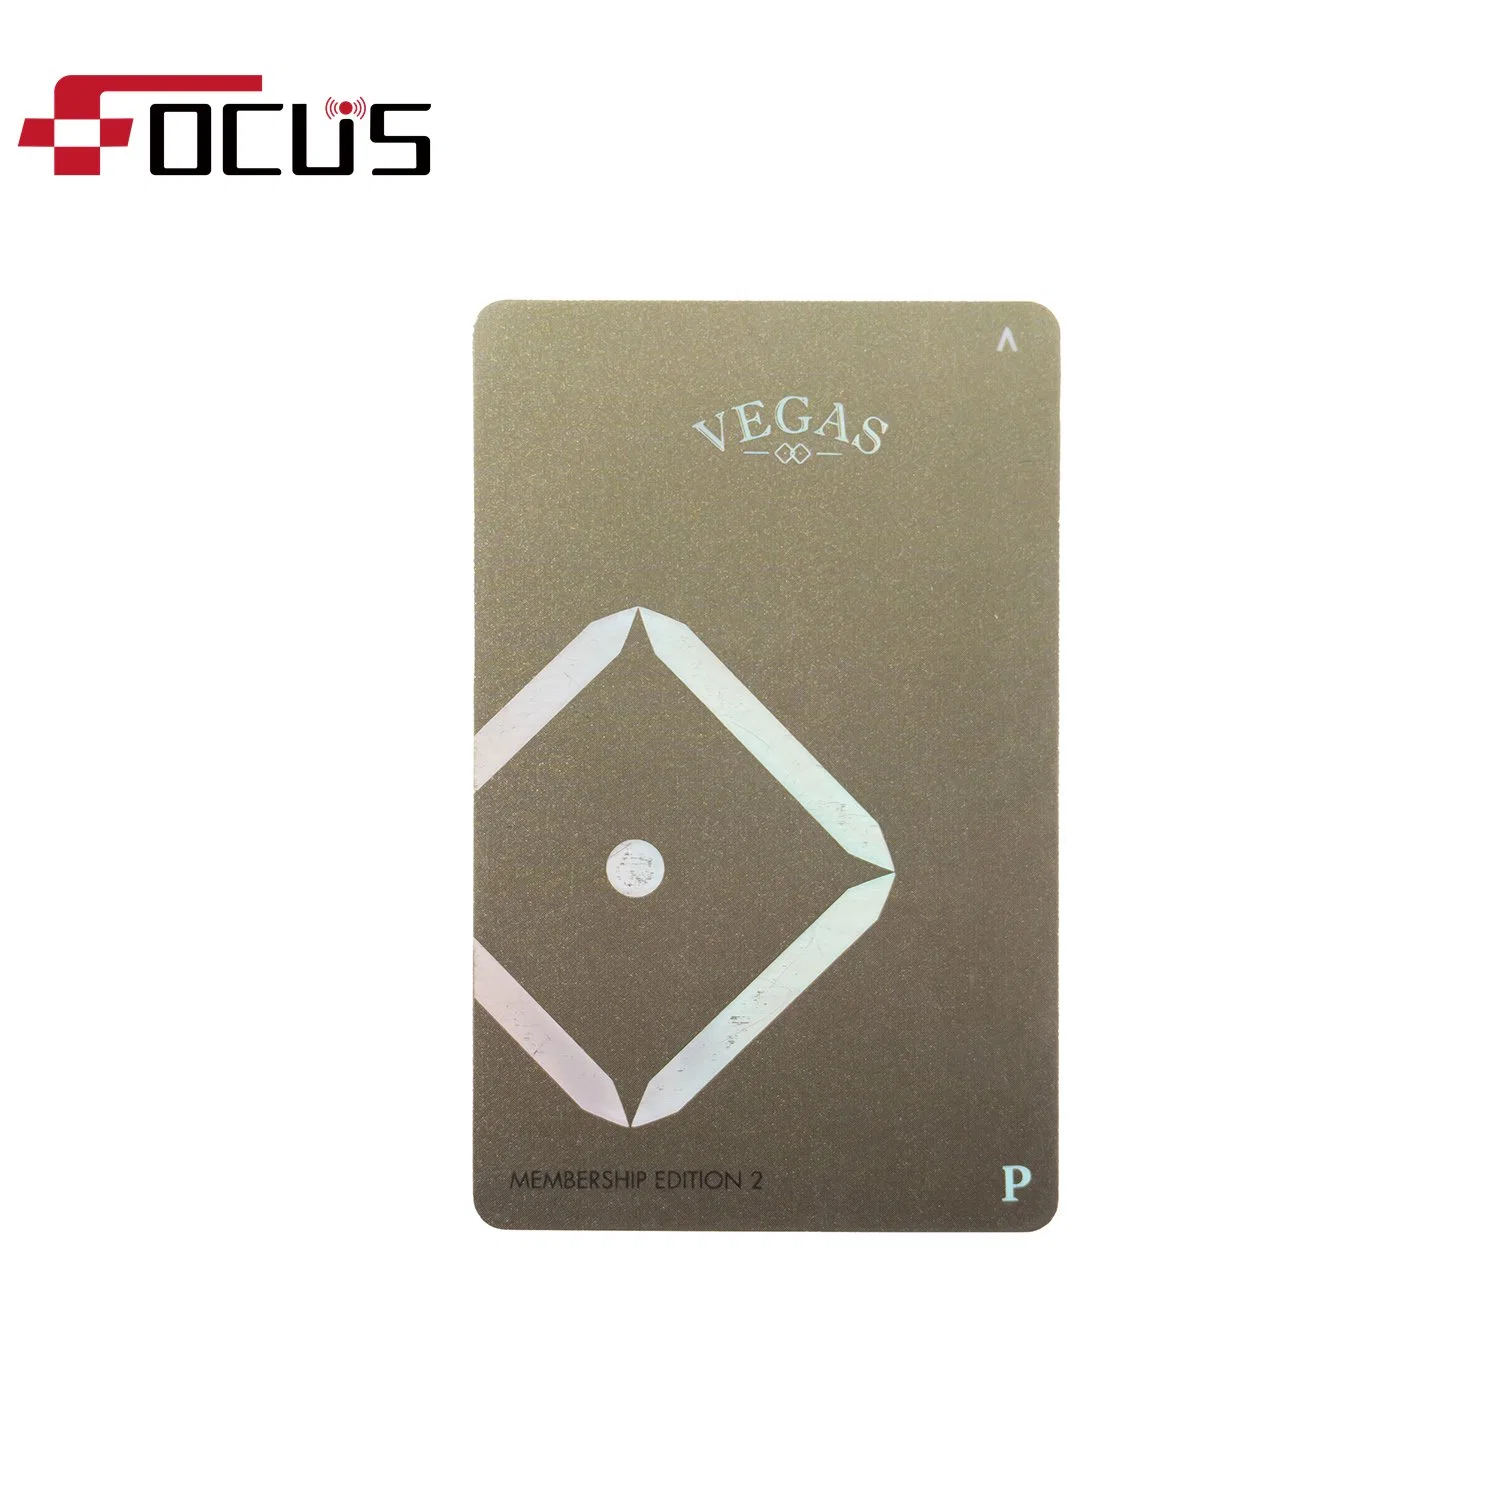 Frosted Finishing Debossed Numbering Plastic PVC Card for Business Card